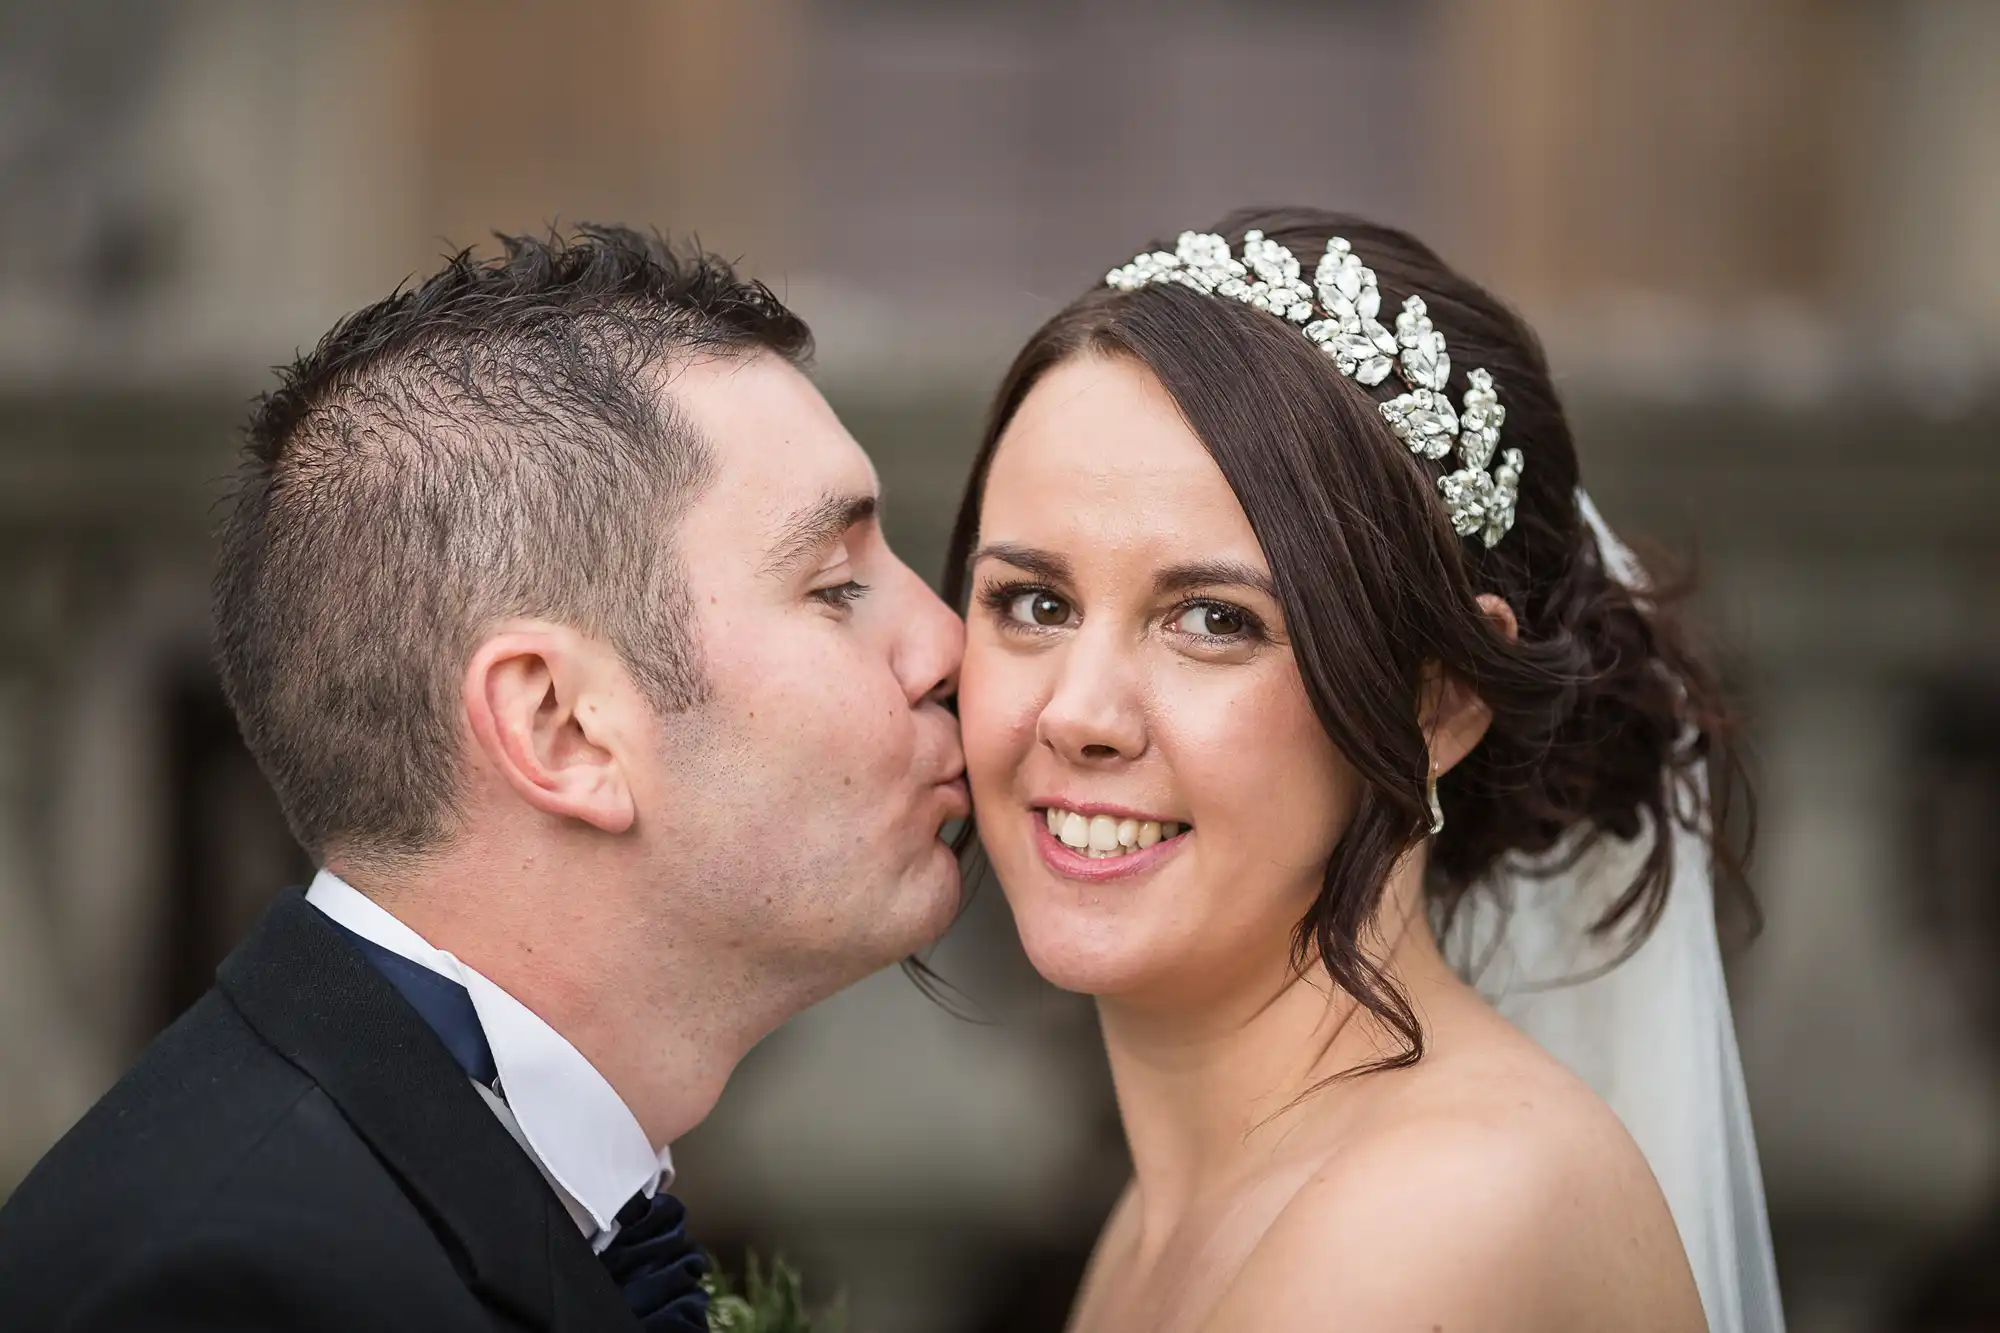 A groom in a black suit kisses the cheek of a bride wearing a white dress and a crystal tiara, with a soft-focus background.